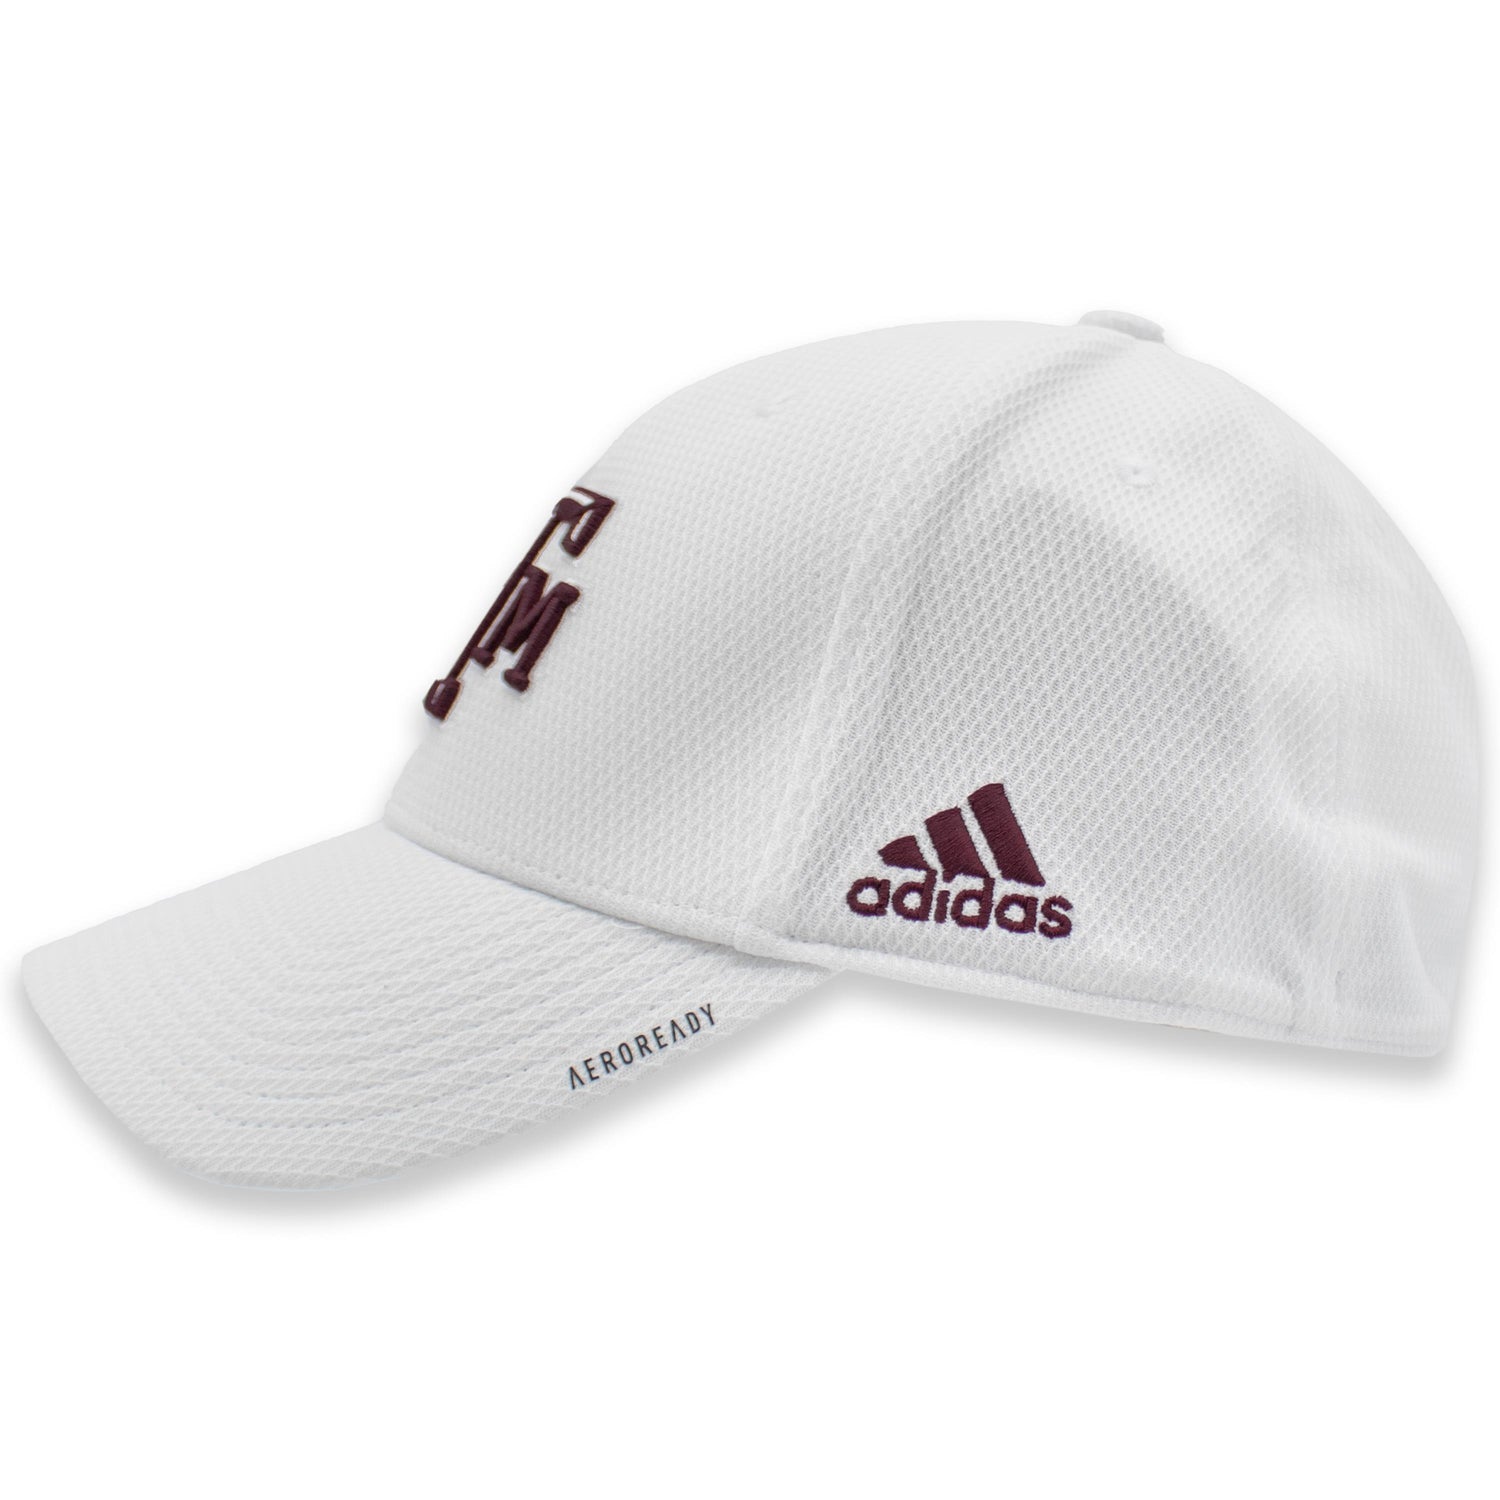 Texas A&M Adidas Coach Structured Flex Fitted Hat